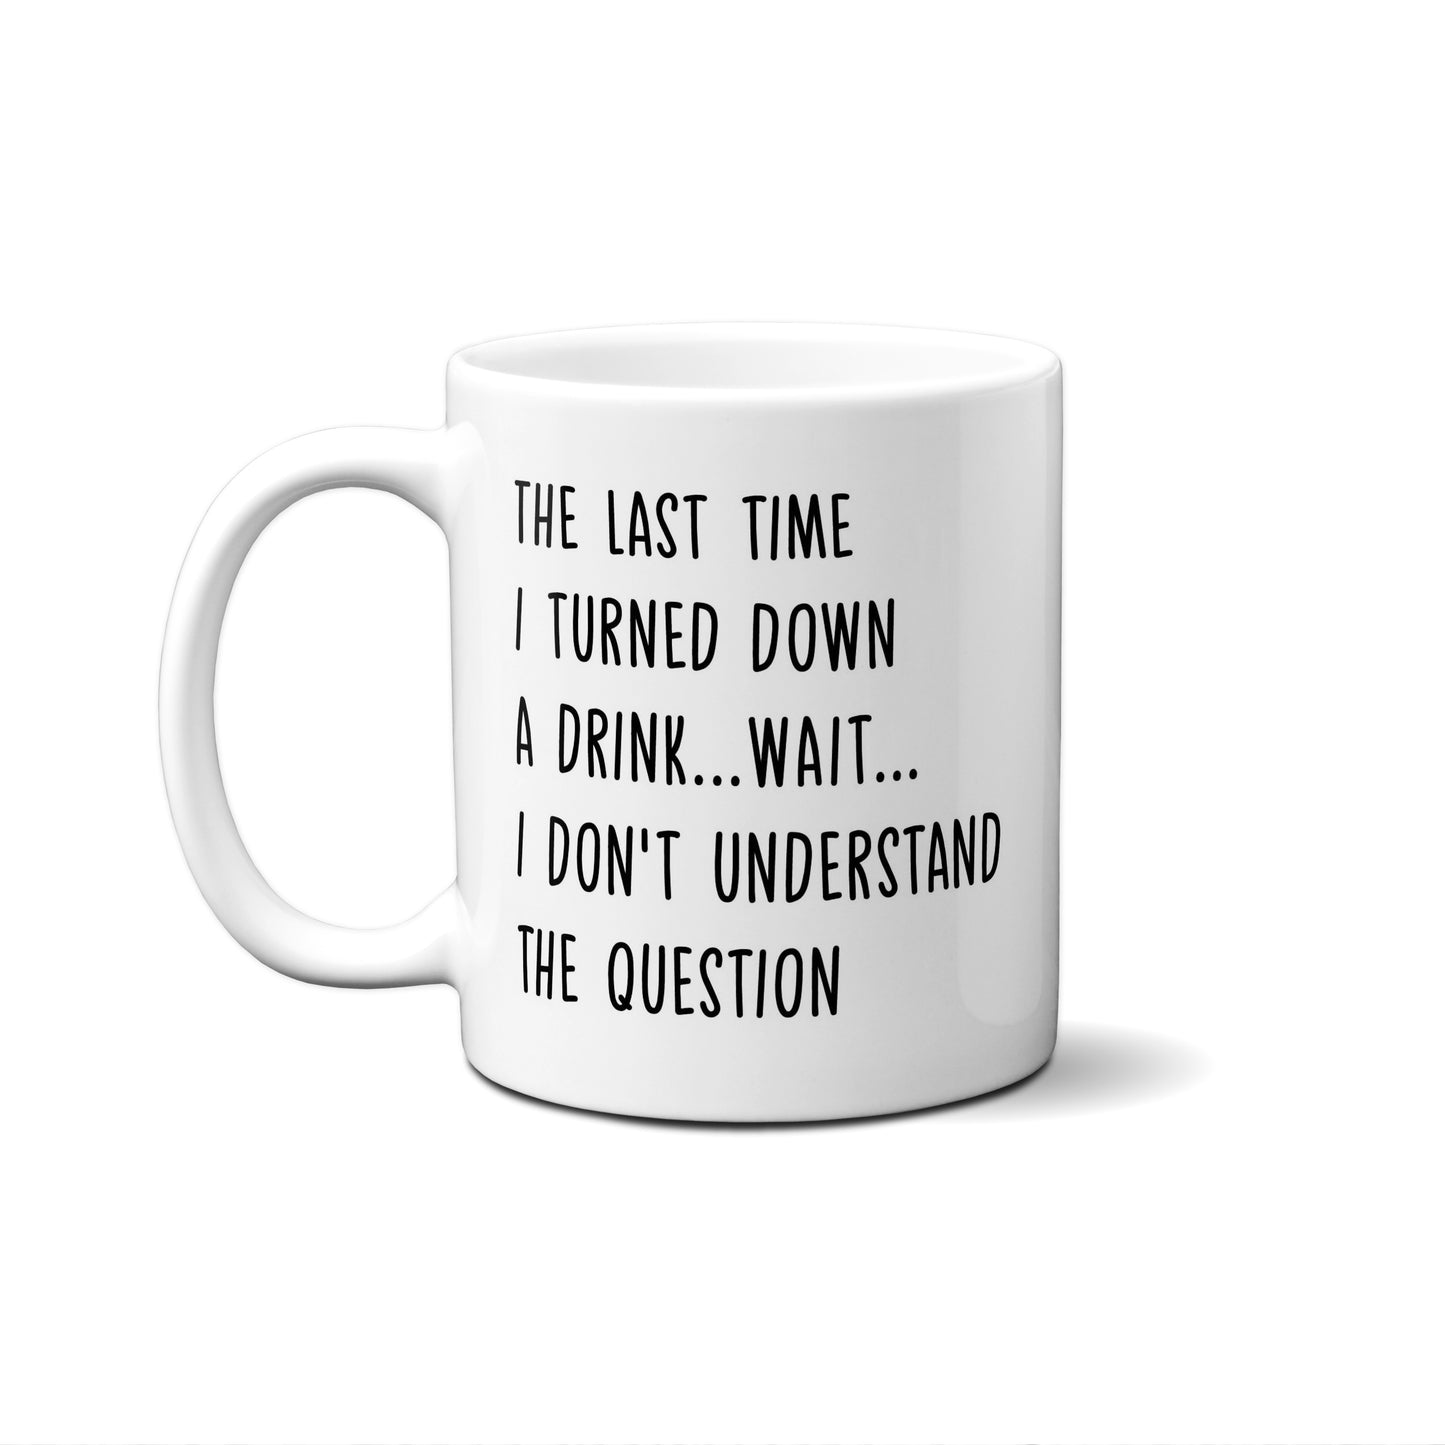 The Last Time I Turned Down A Drink...Wait...Quote Mug